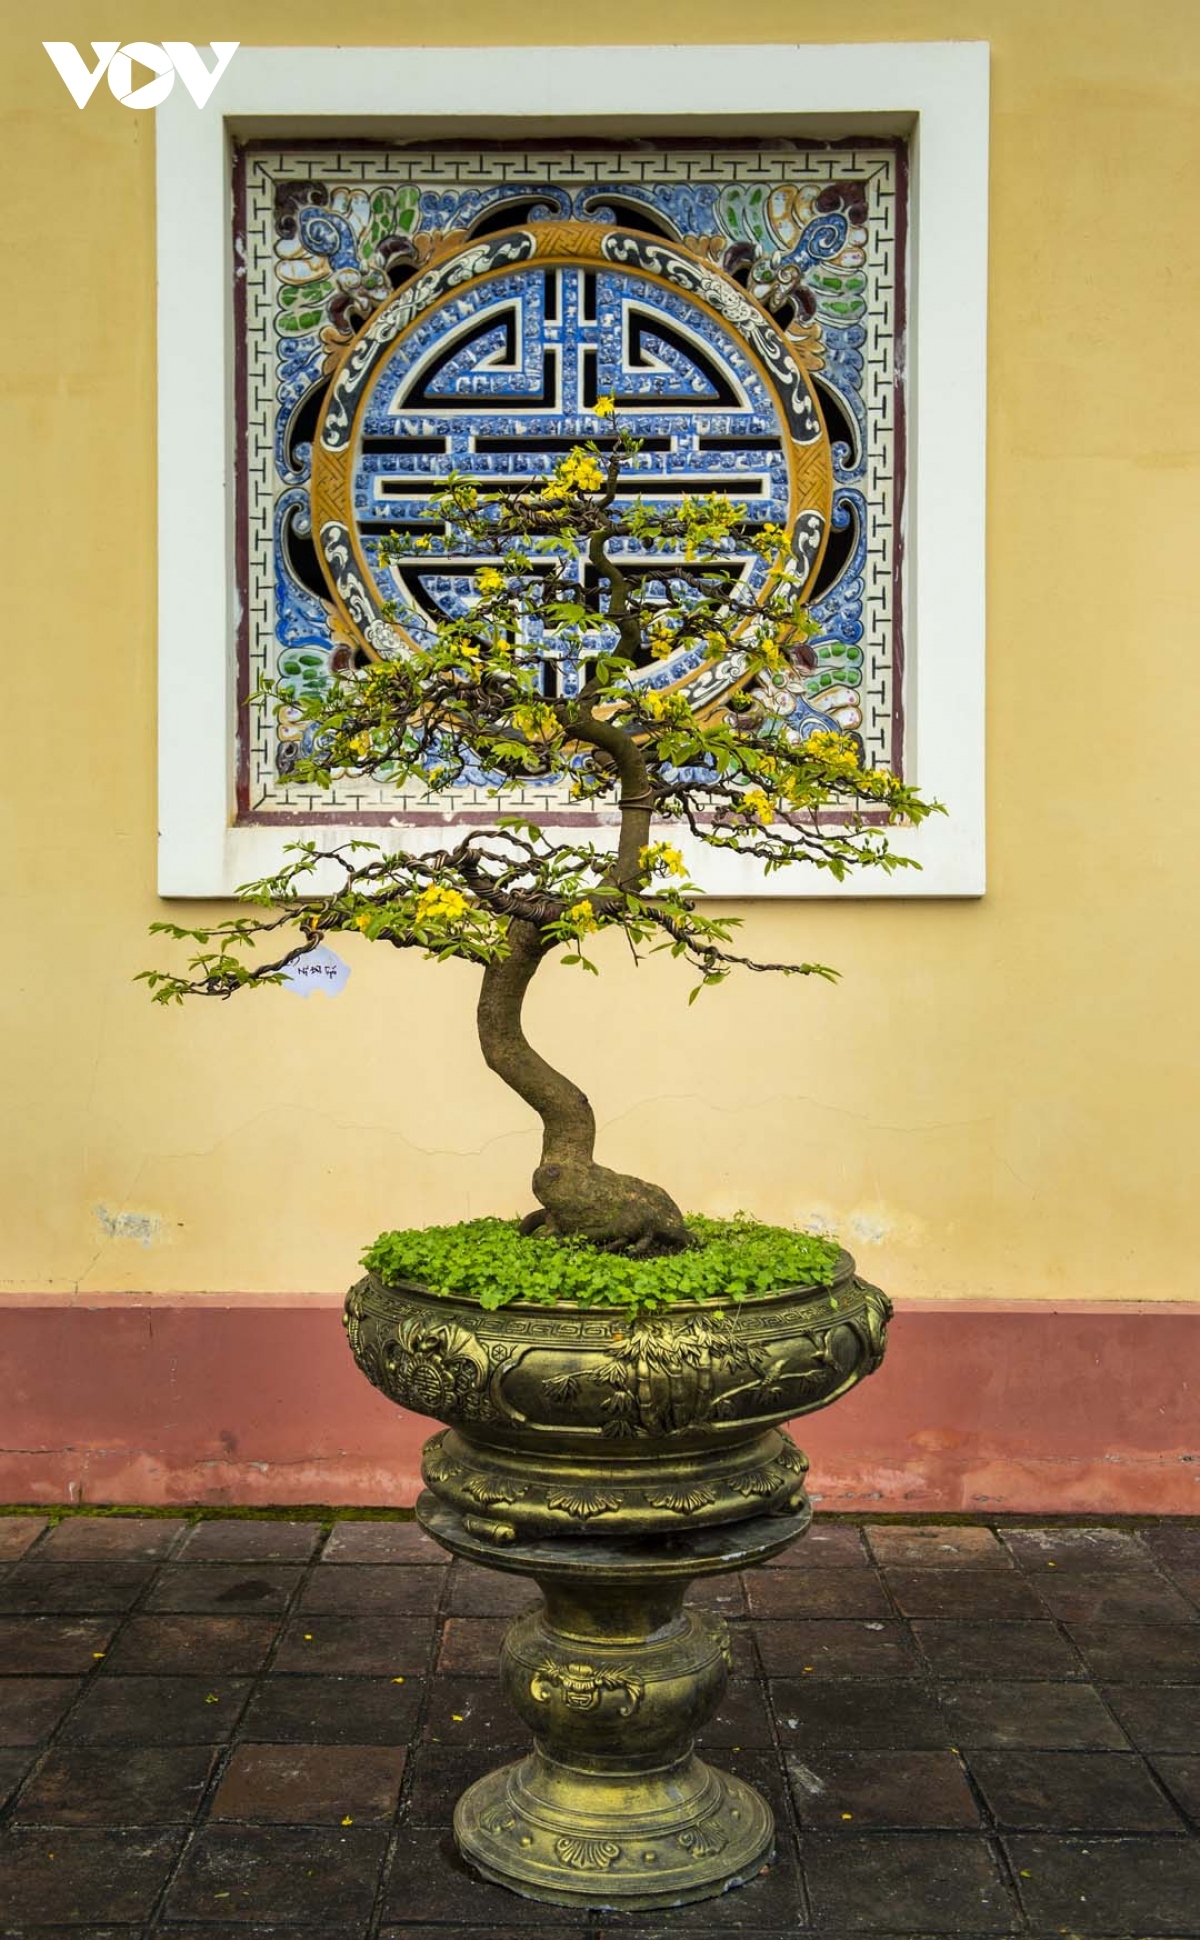 yellow apricot blossoms signal tet arrival in former hue imperial city picture 7